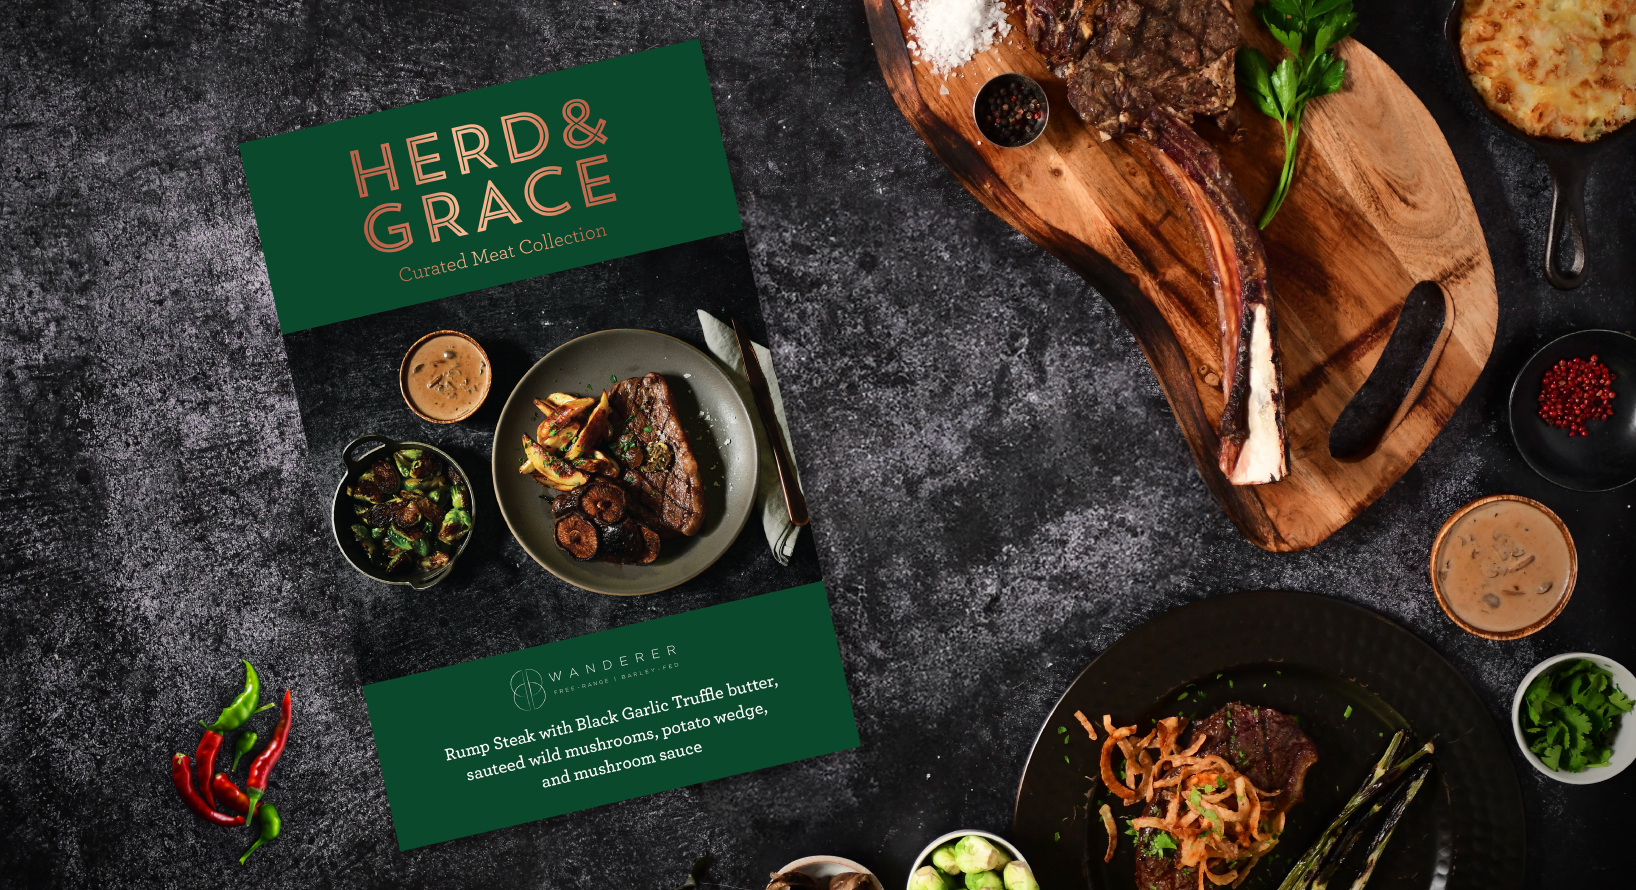 Herd & Grace Branded Recipe Card on Slate Background Surrounded by various ingredients